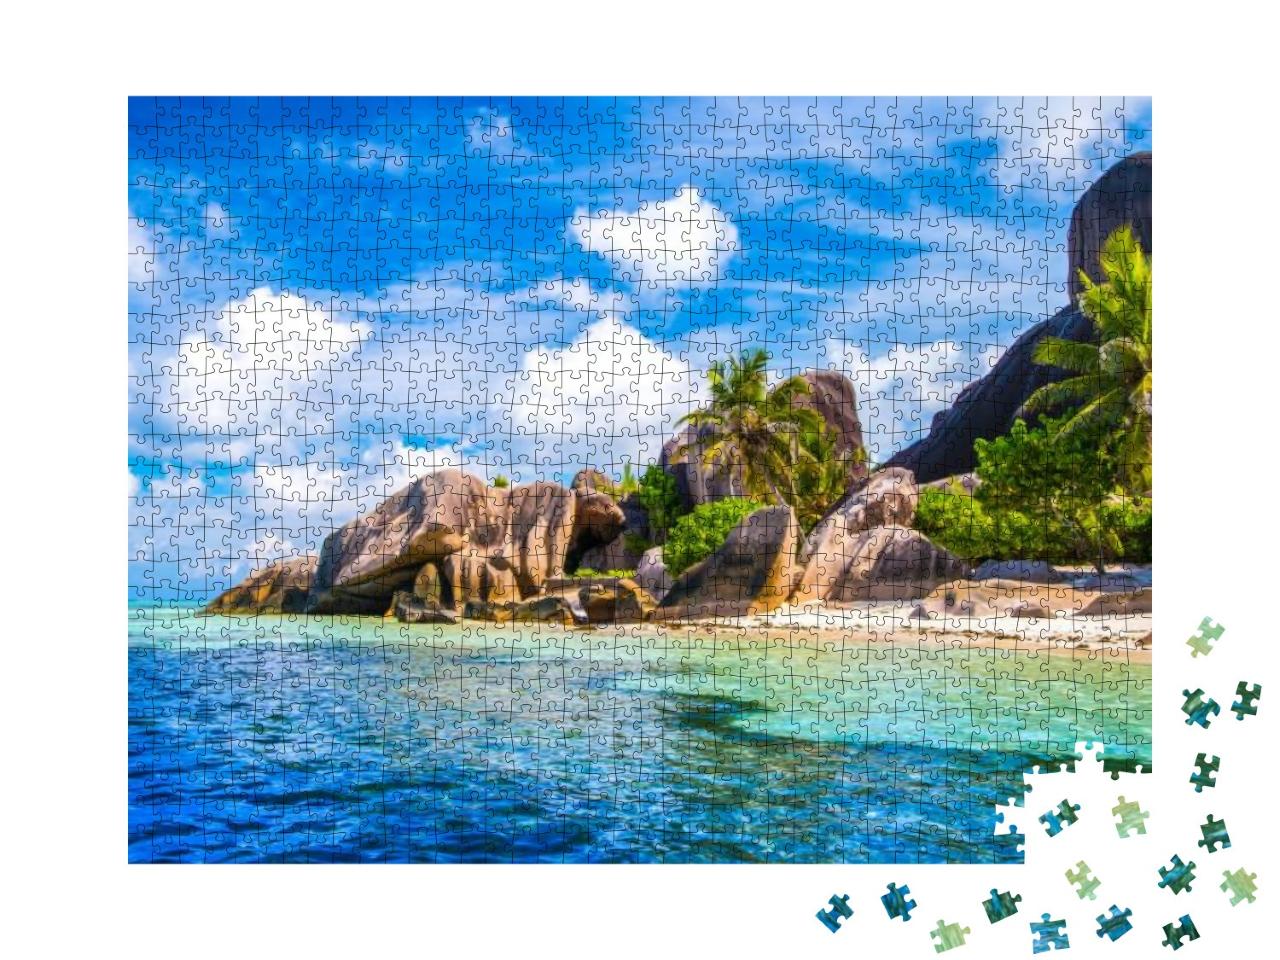 The Famous Beach, Source Dargent At La Digue Island, Seyc... Jigsaw Puzzle with 1000 pieces